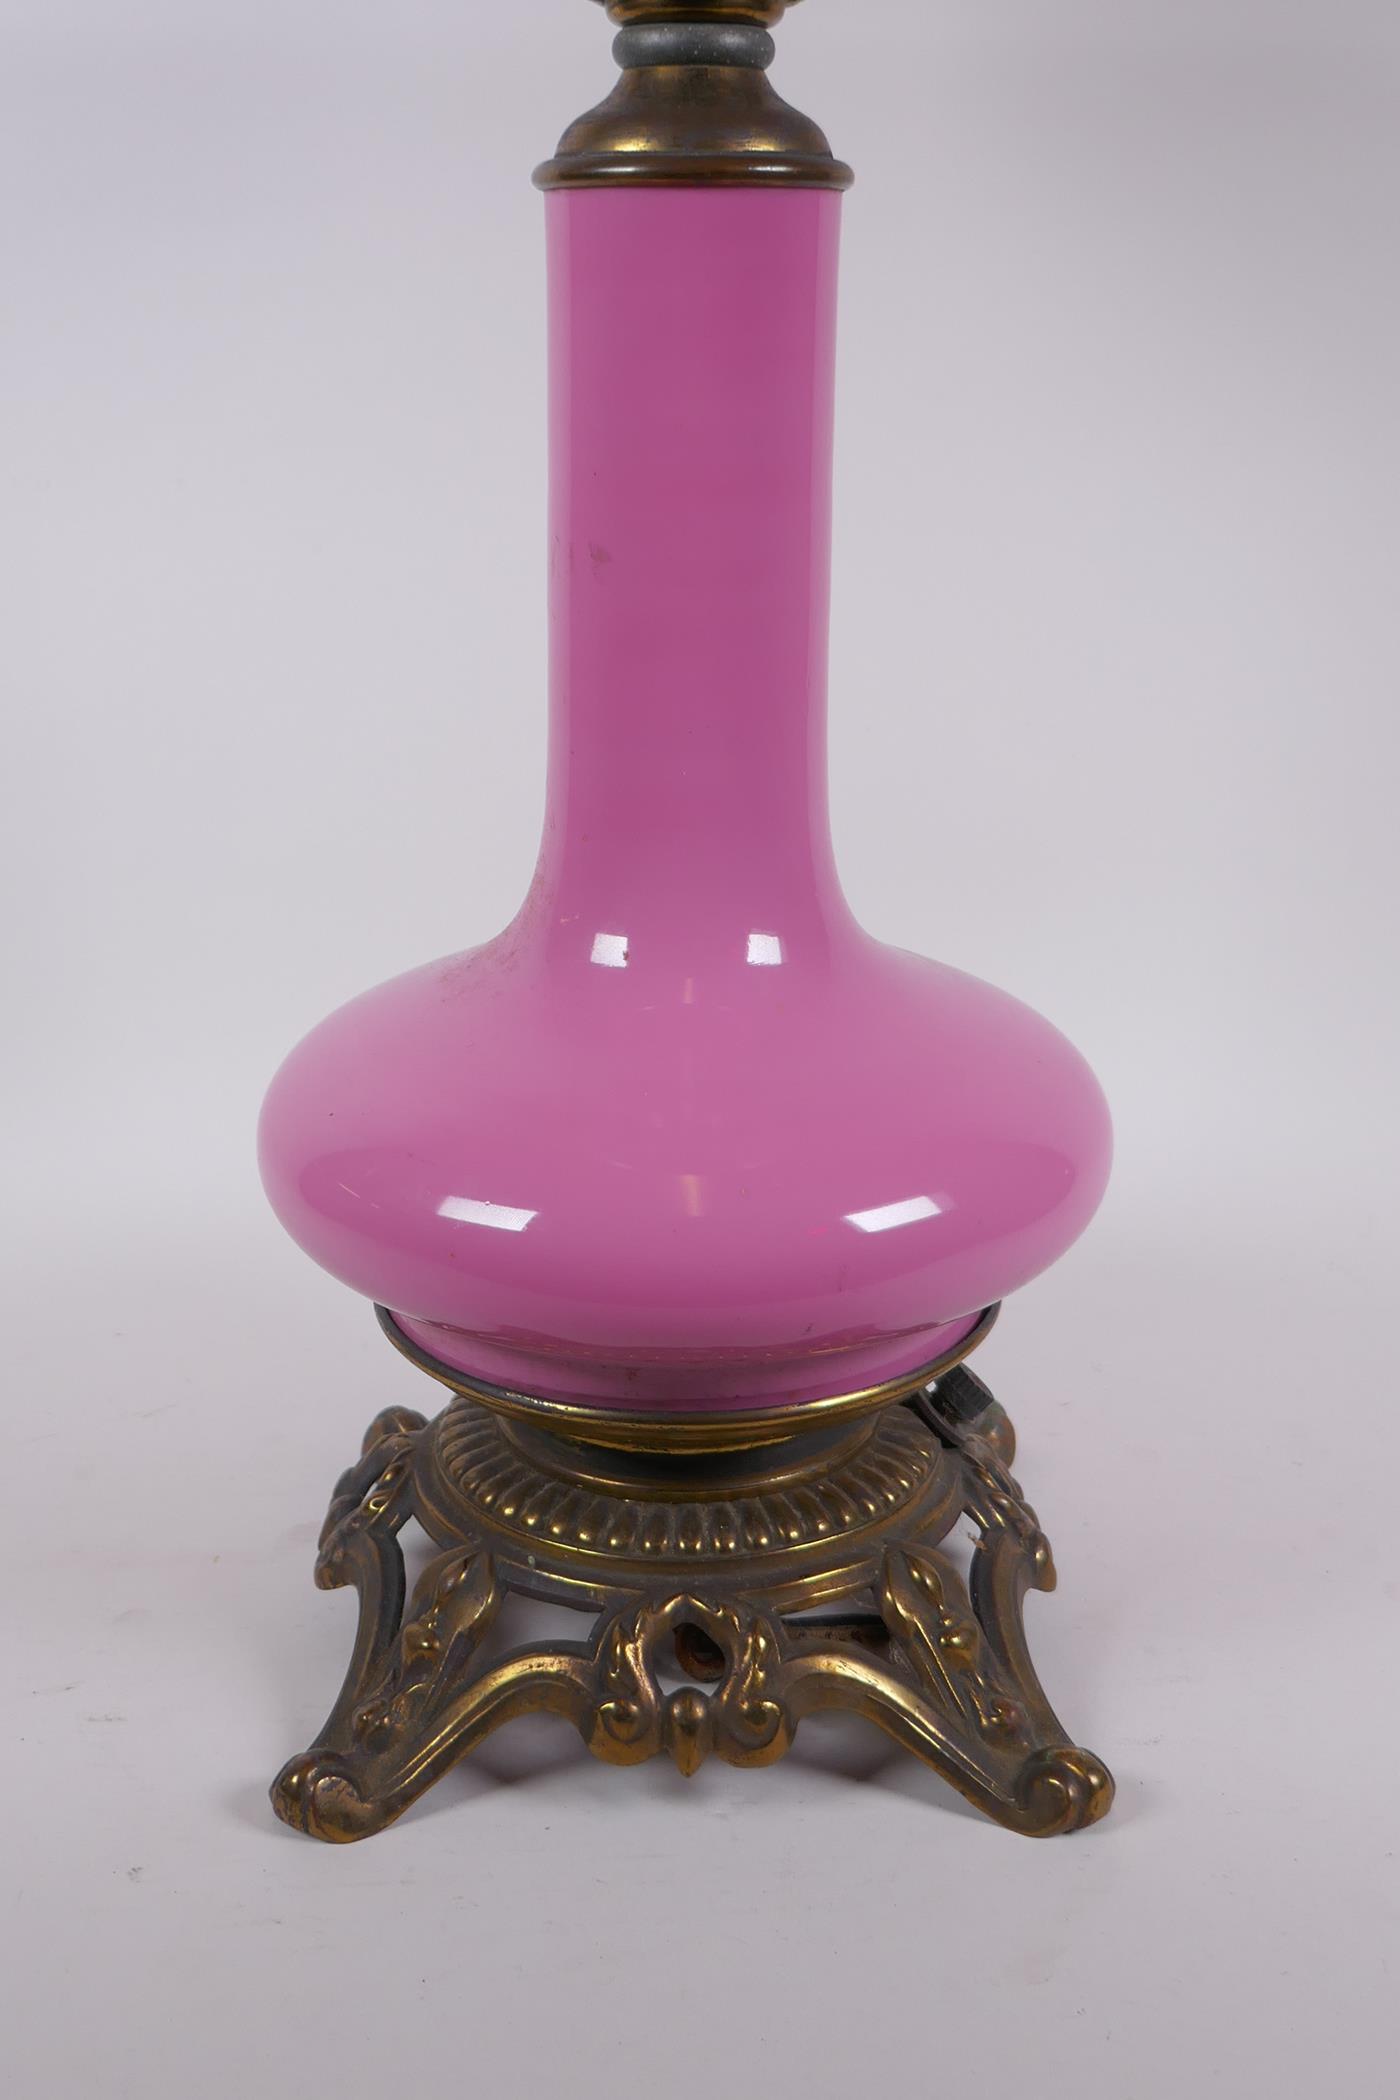 A pink glass and brassed metal oil lamp converted to electricity, 64cm high - Image 3 of 5